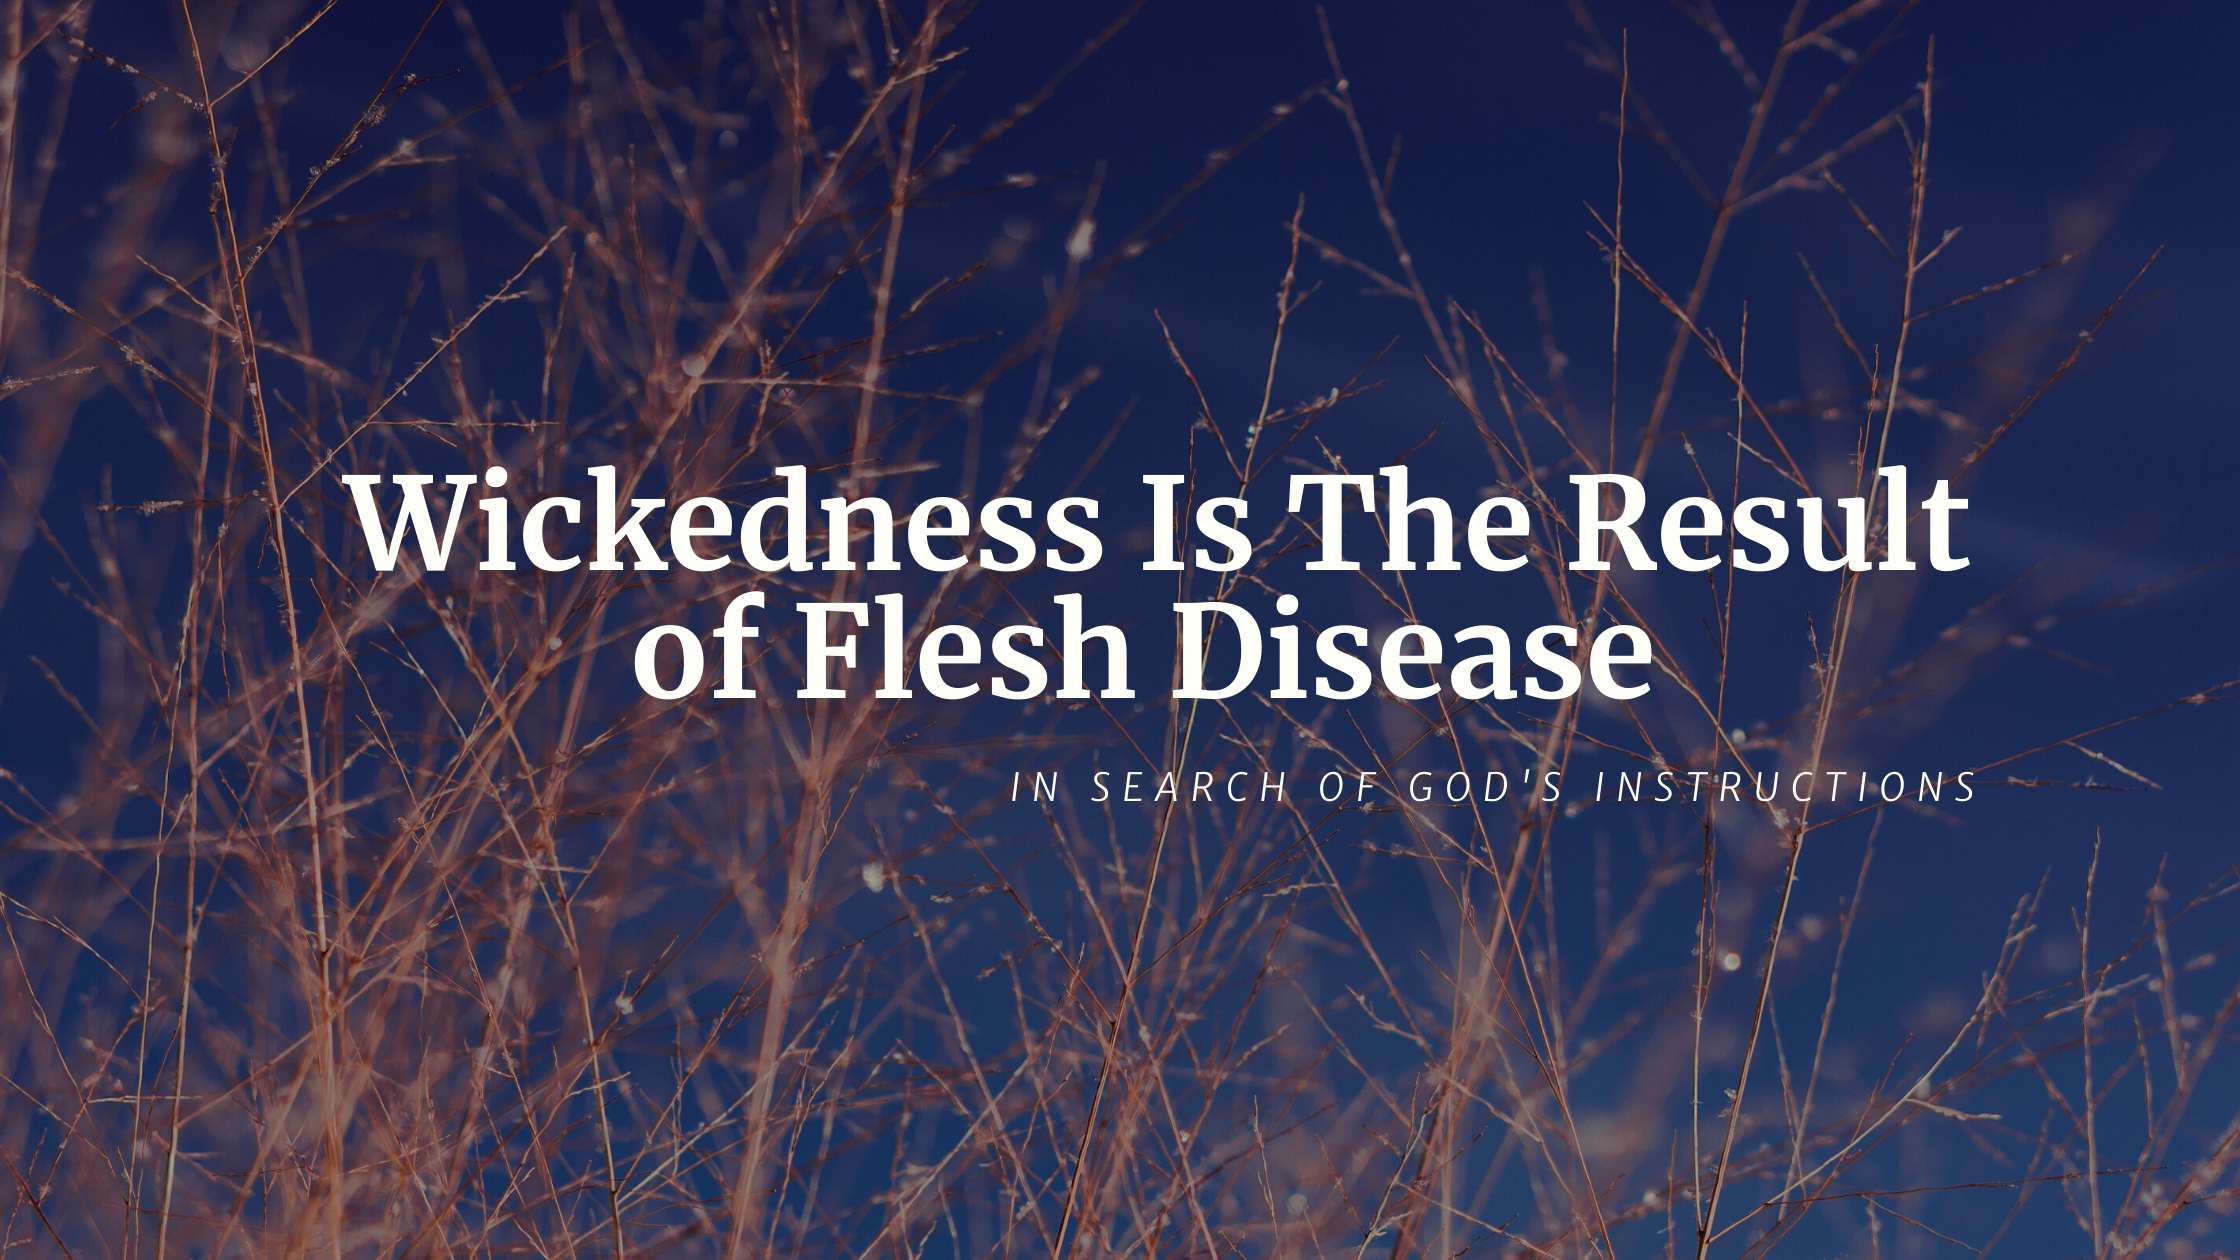 Wickedness-Is-The-Result-of-Flesh-Disease/graphic